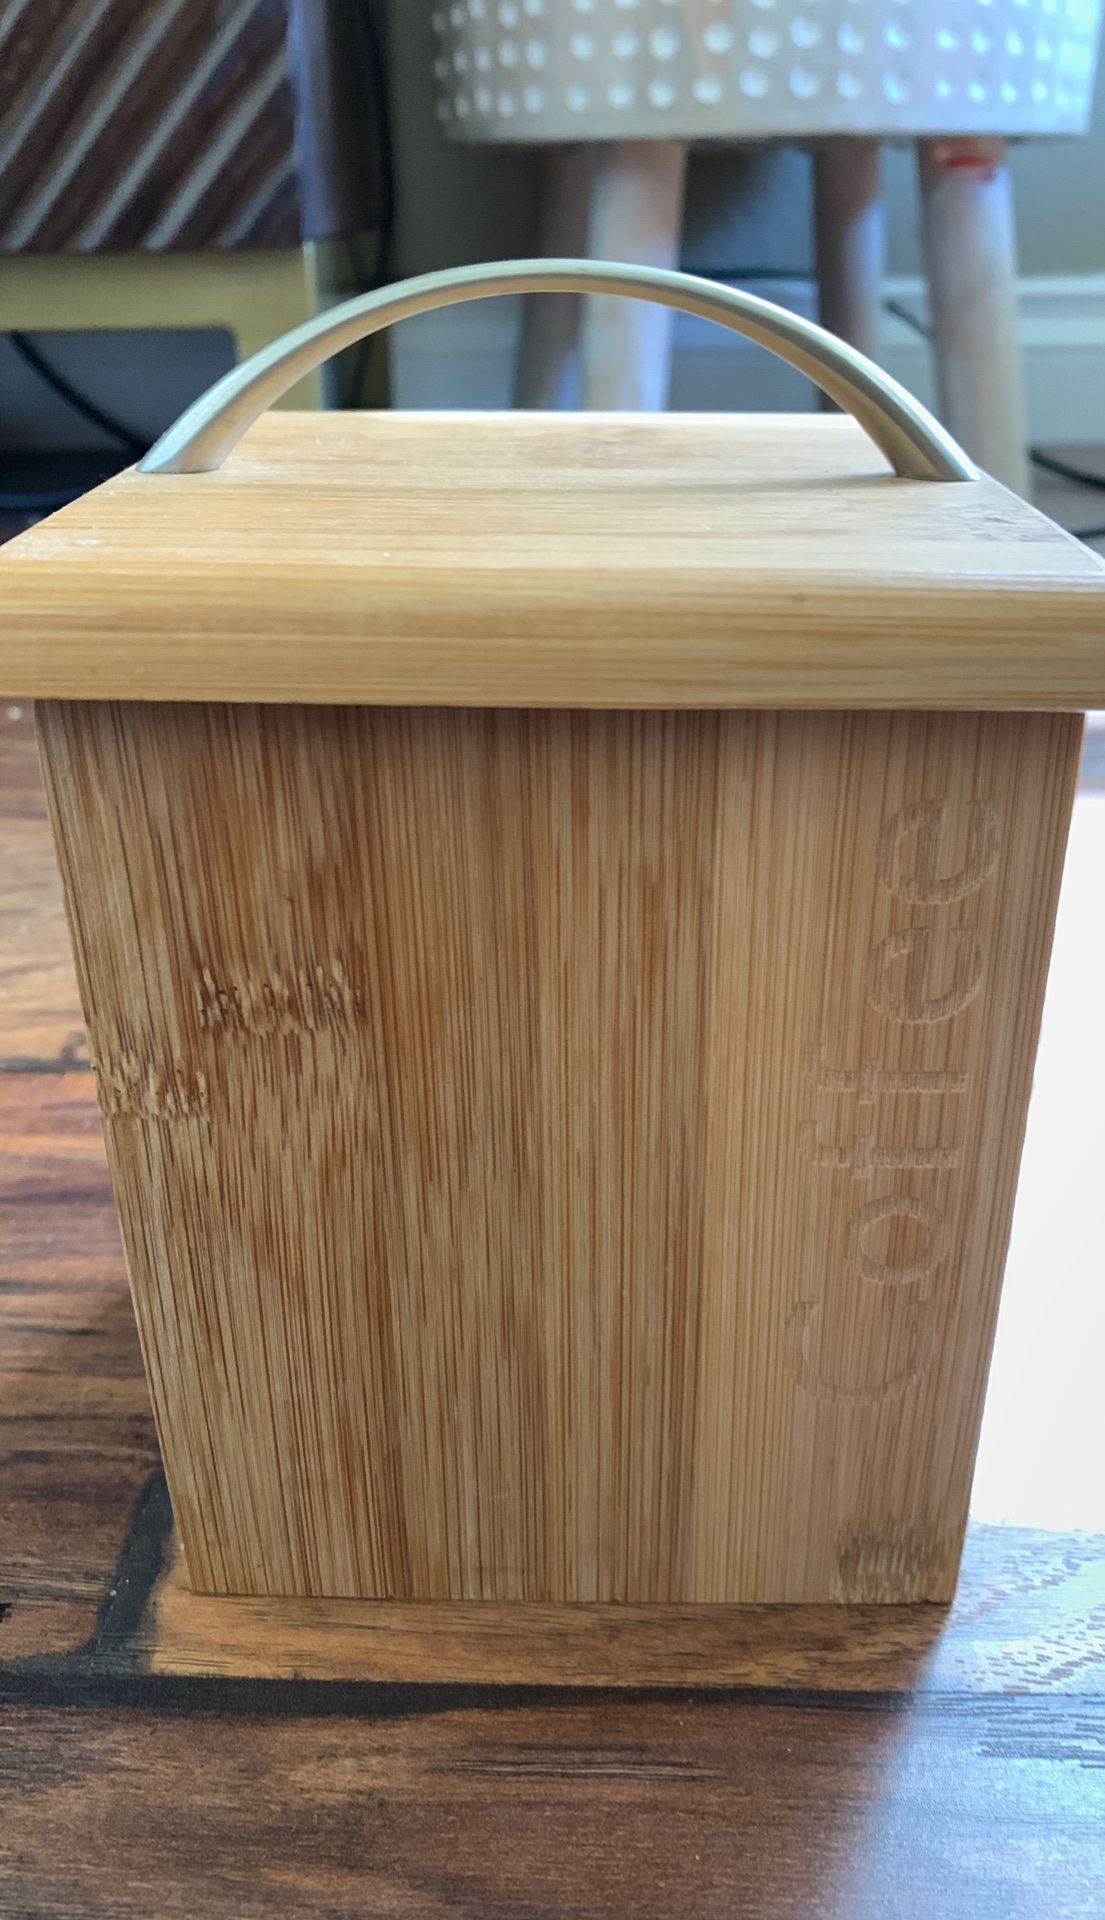 Bamboo coffee container with lid 4.25 x 6 inches